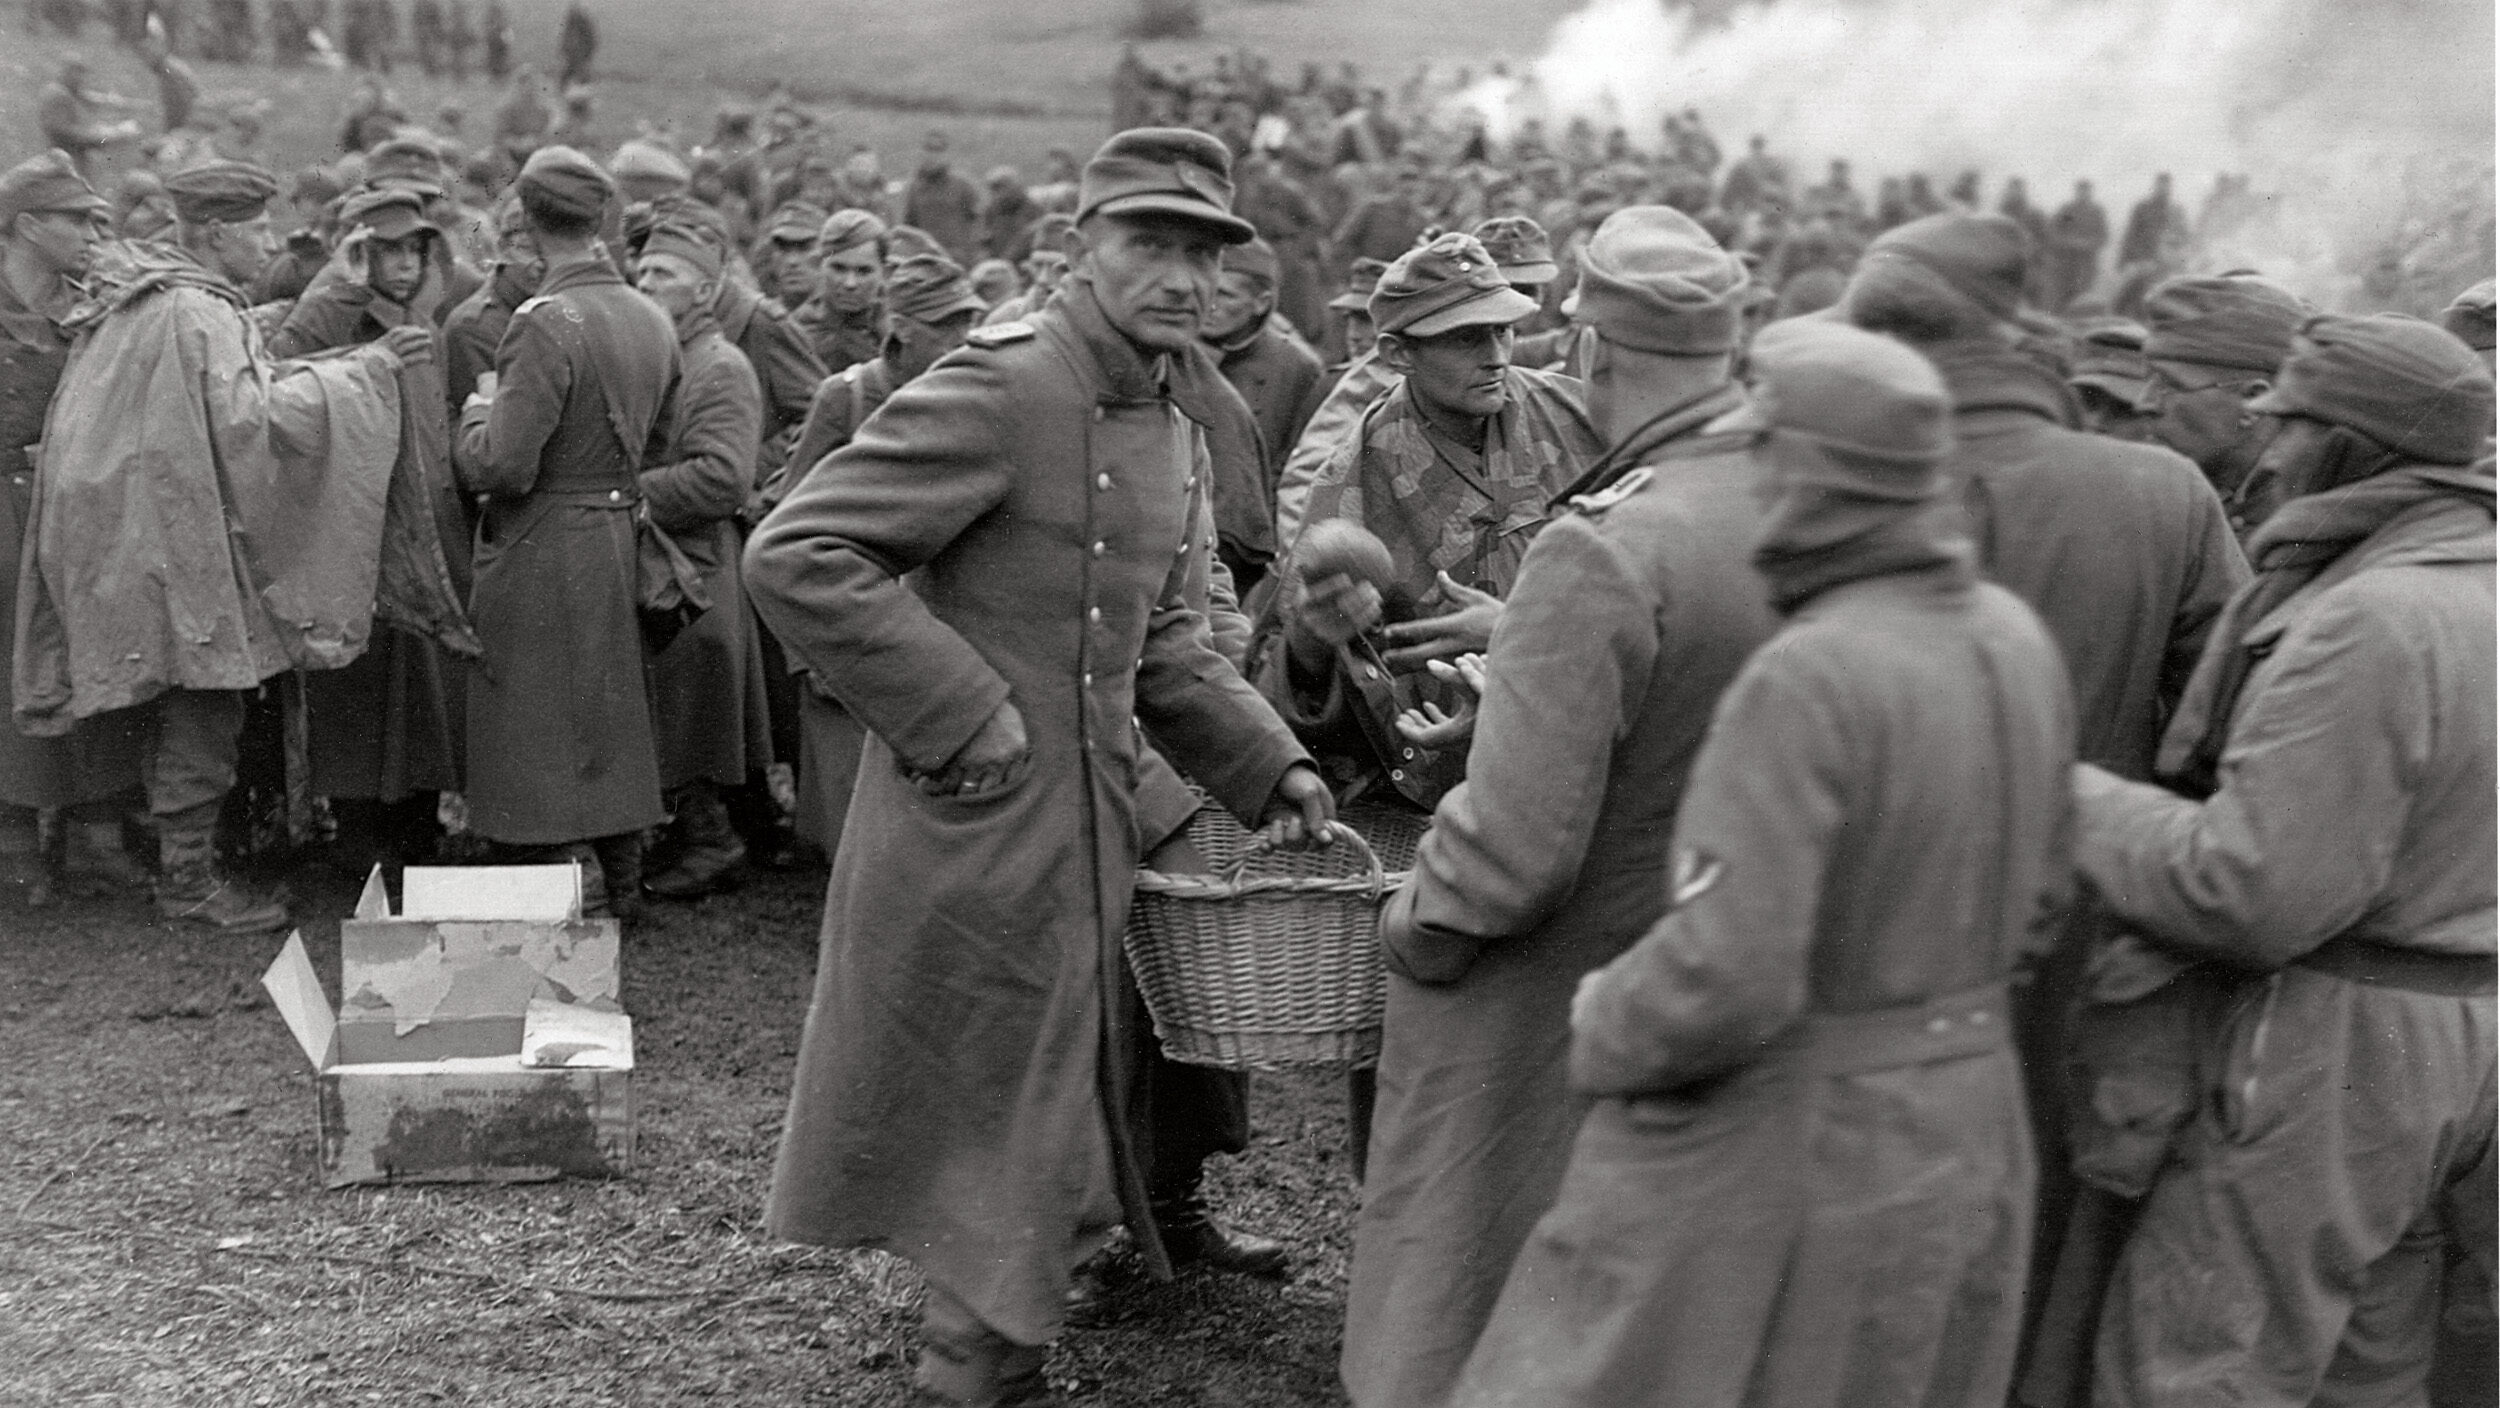 Shortly after a surrender to U.S. forces, German officers hand out rations of bread to hungry soldiers.